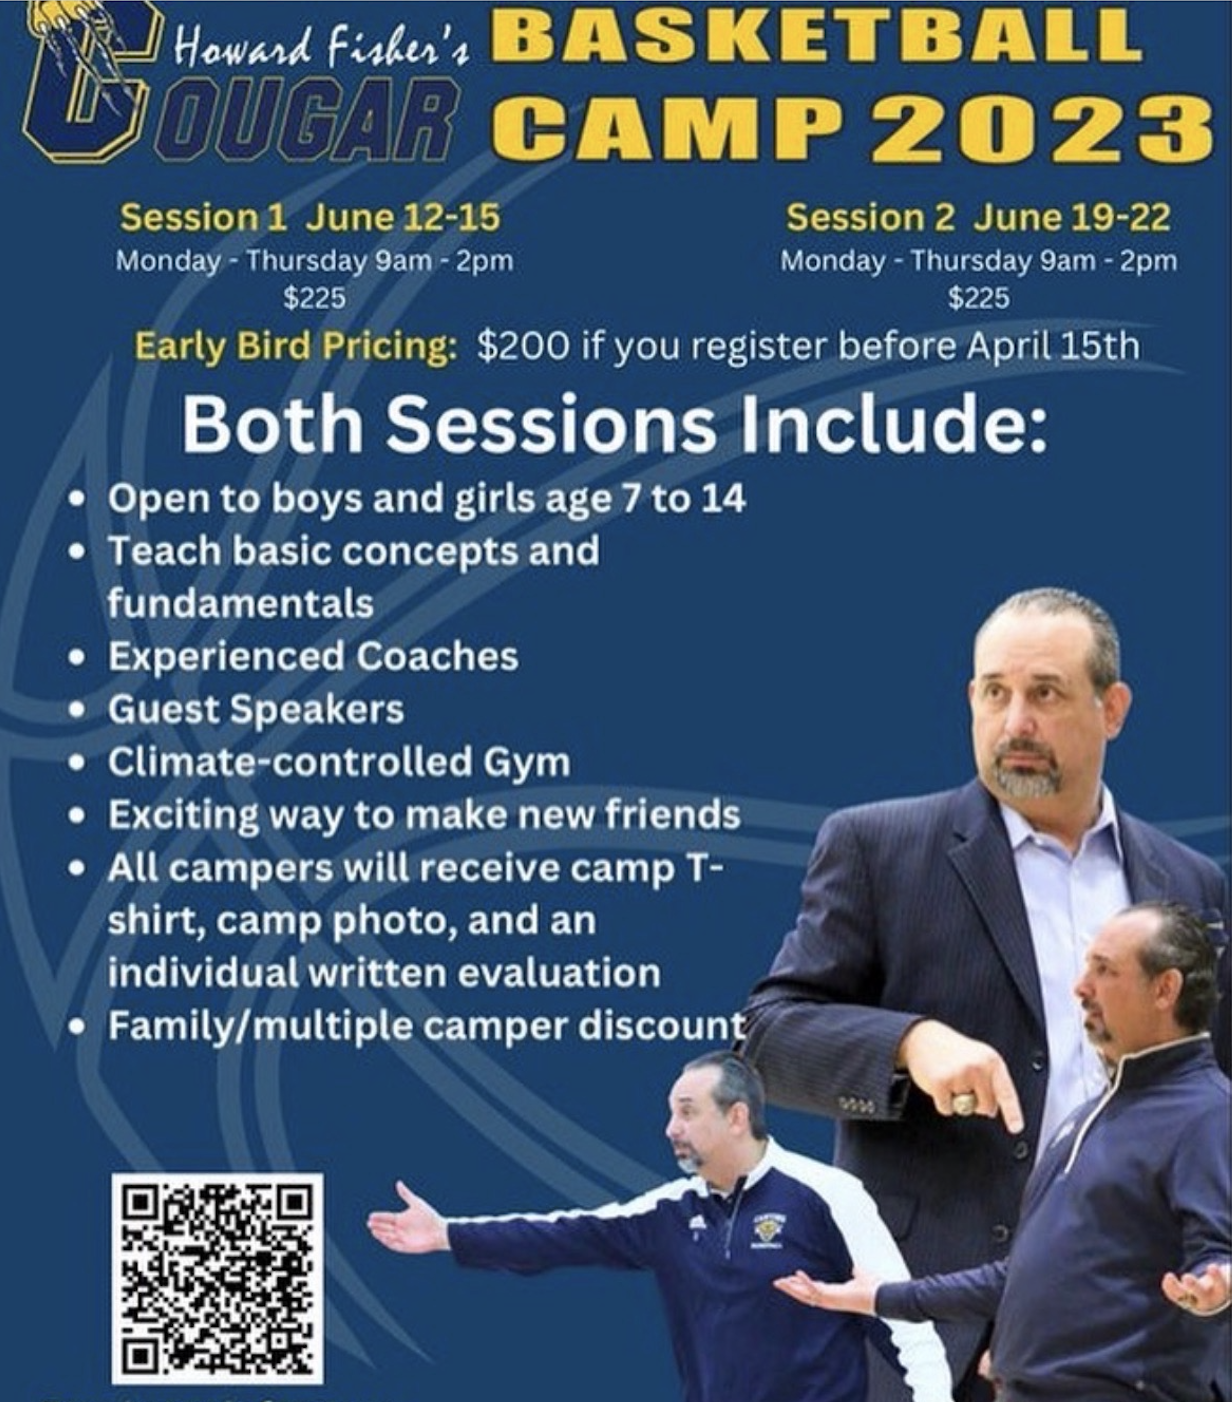 College of the Canyons 2023 Howard Fisher Basketball Camp promotional flier.